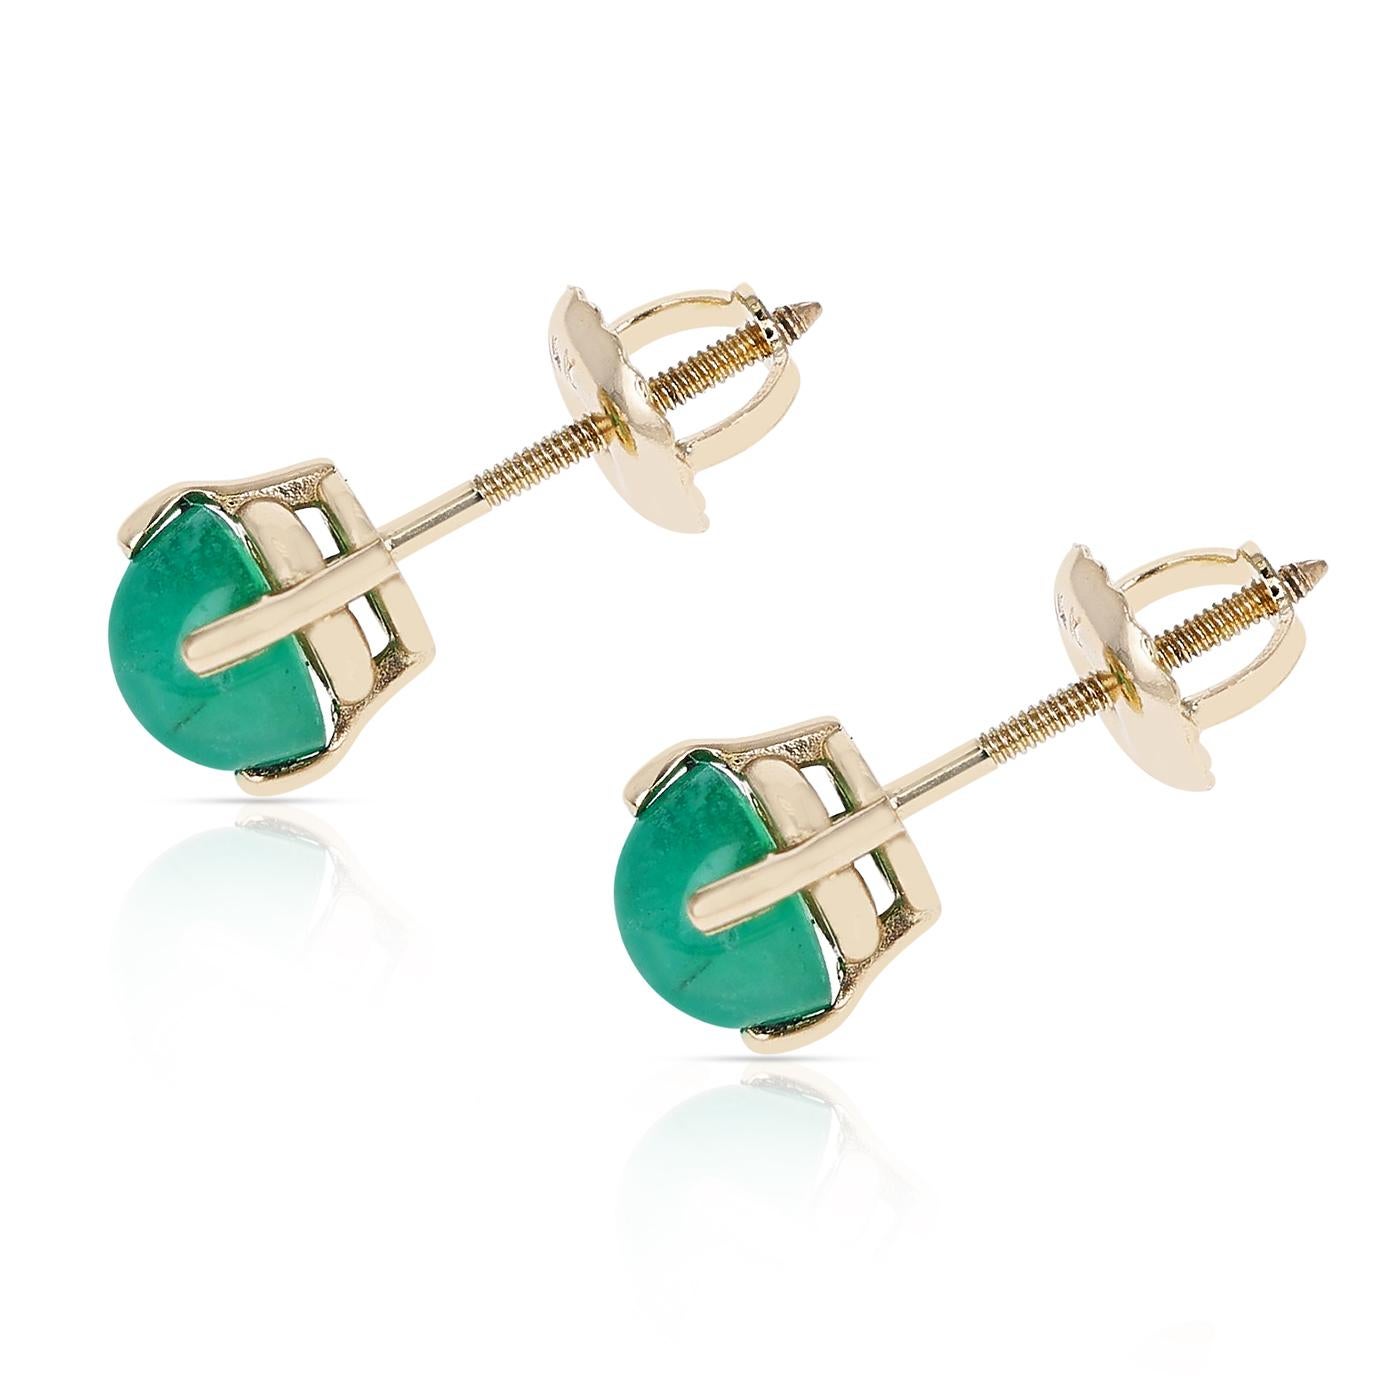 A pair of 6MM Emerald Round Cabochon Stud Earrings made in 14 Karat Yellow Gold. The total stone weight is 1.79 carats.